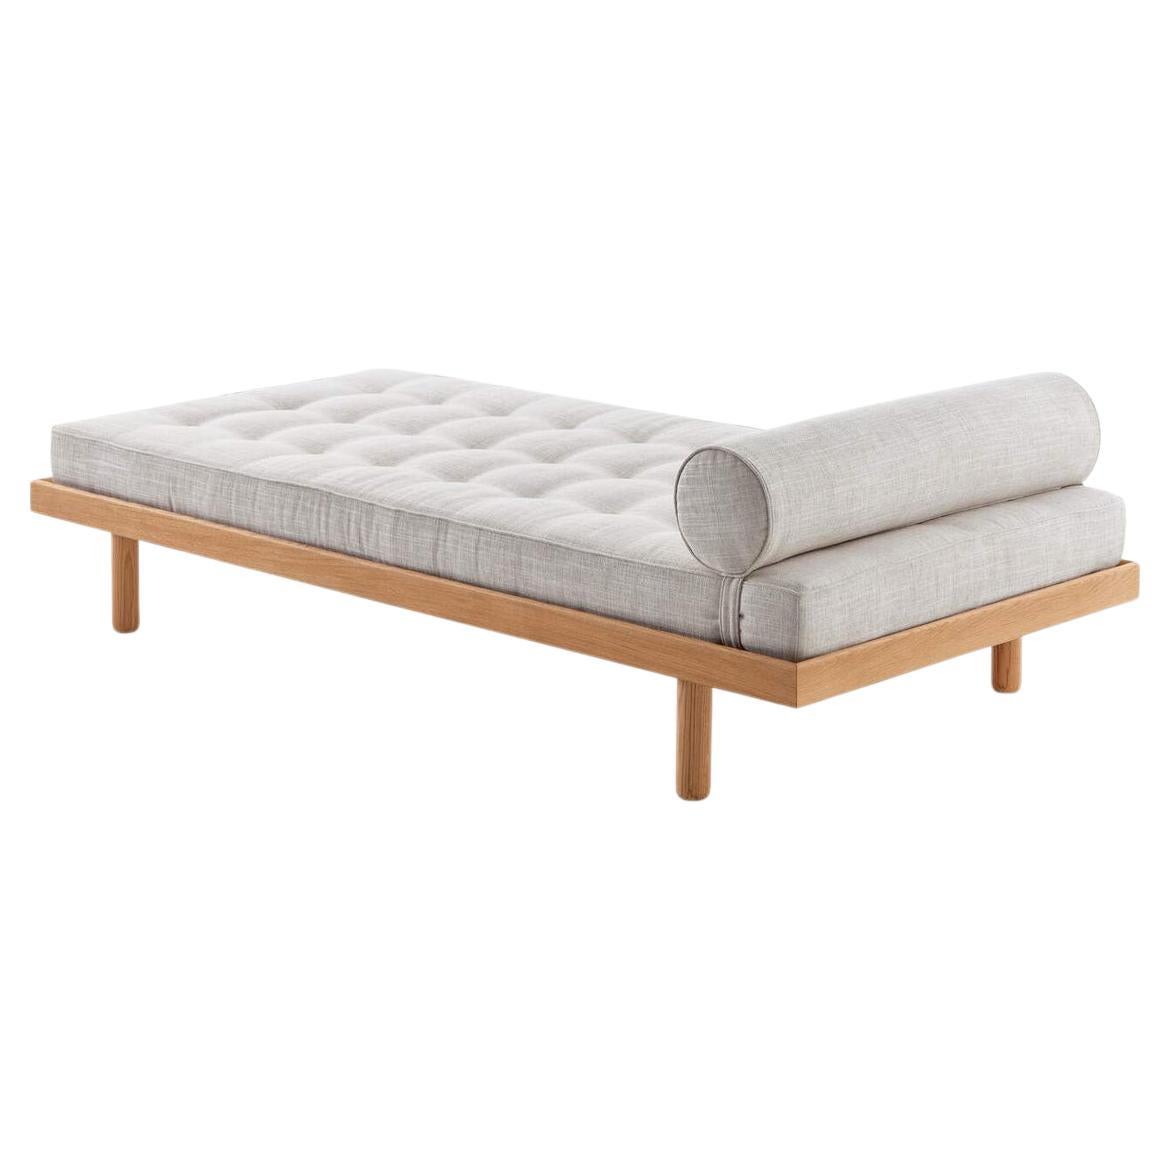 Charlotte Perriand Mid-Century Modern LC35 Maison Du Brésil Daybed by Cassina

Daybed designed by Charlotte Perriand in 1959. Relaunched in 2018.
Manufactured by Cassina in Italy.

This daybed is part of a faithful reproduction of a student